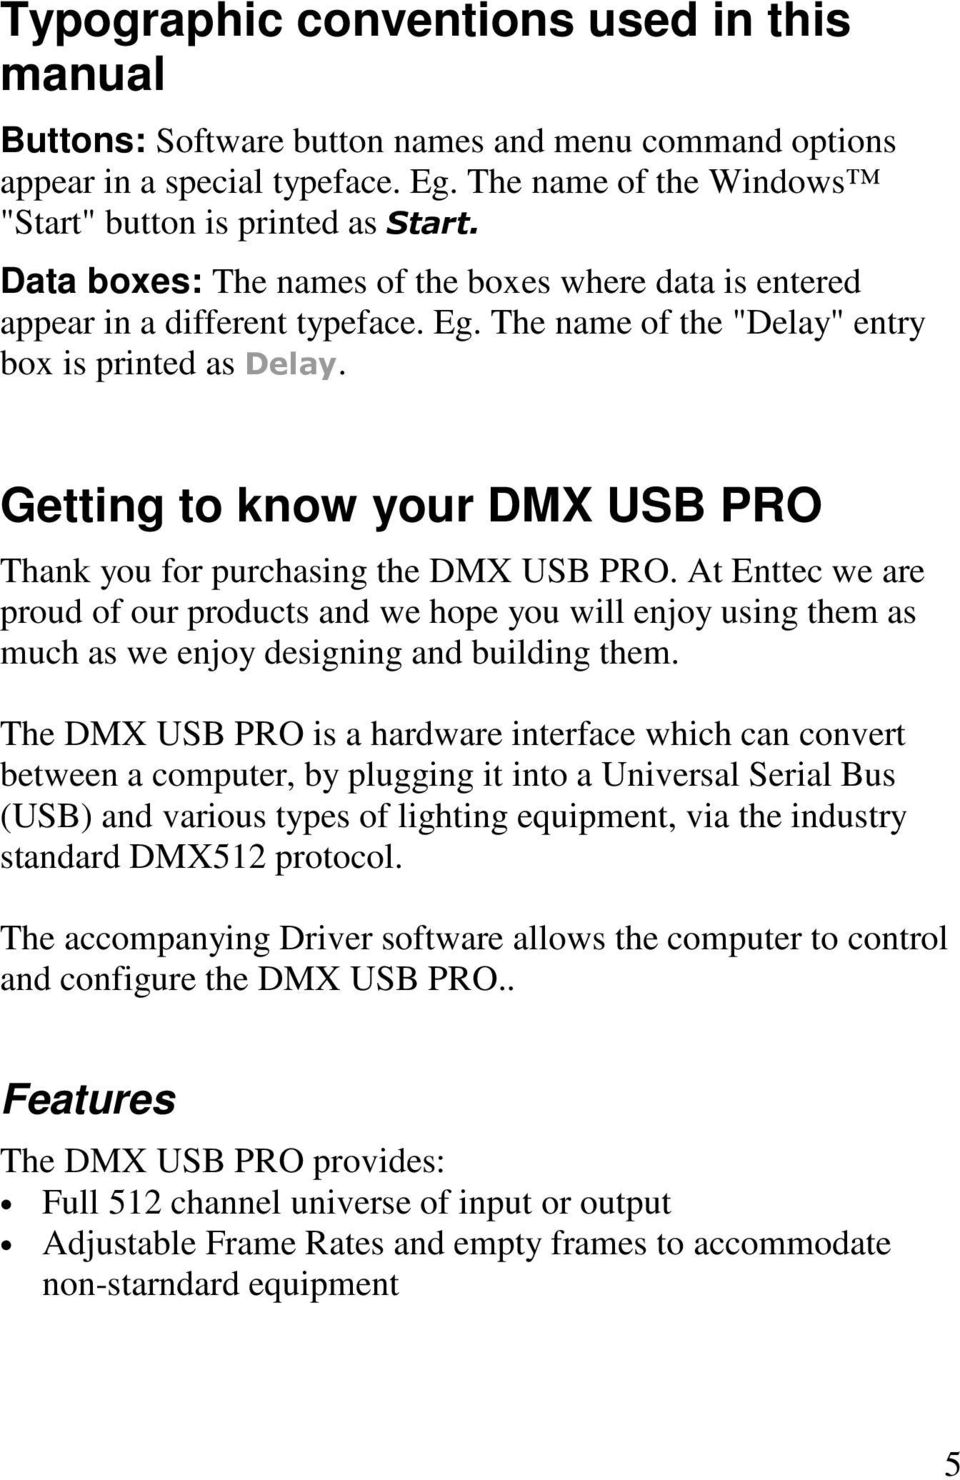 Getting to know your DMX USB PRO Thank you for purchasing the DMX USB PRO. At Enttec we are proud of our products and we hope you will enjoy using them as much as we enjoy designing and building them.